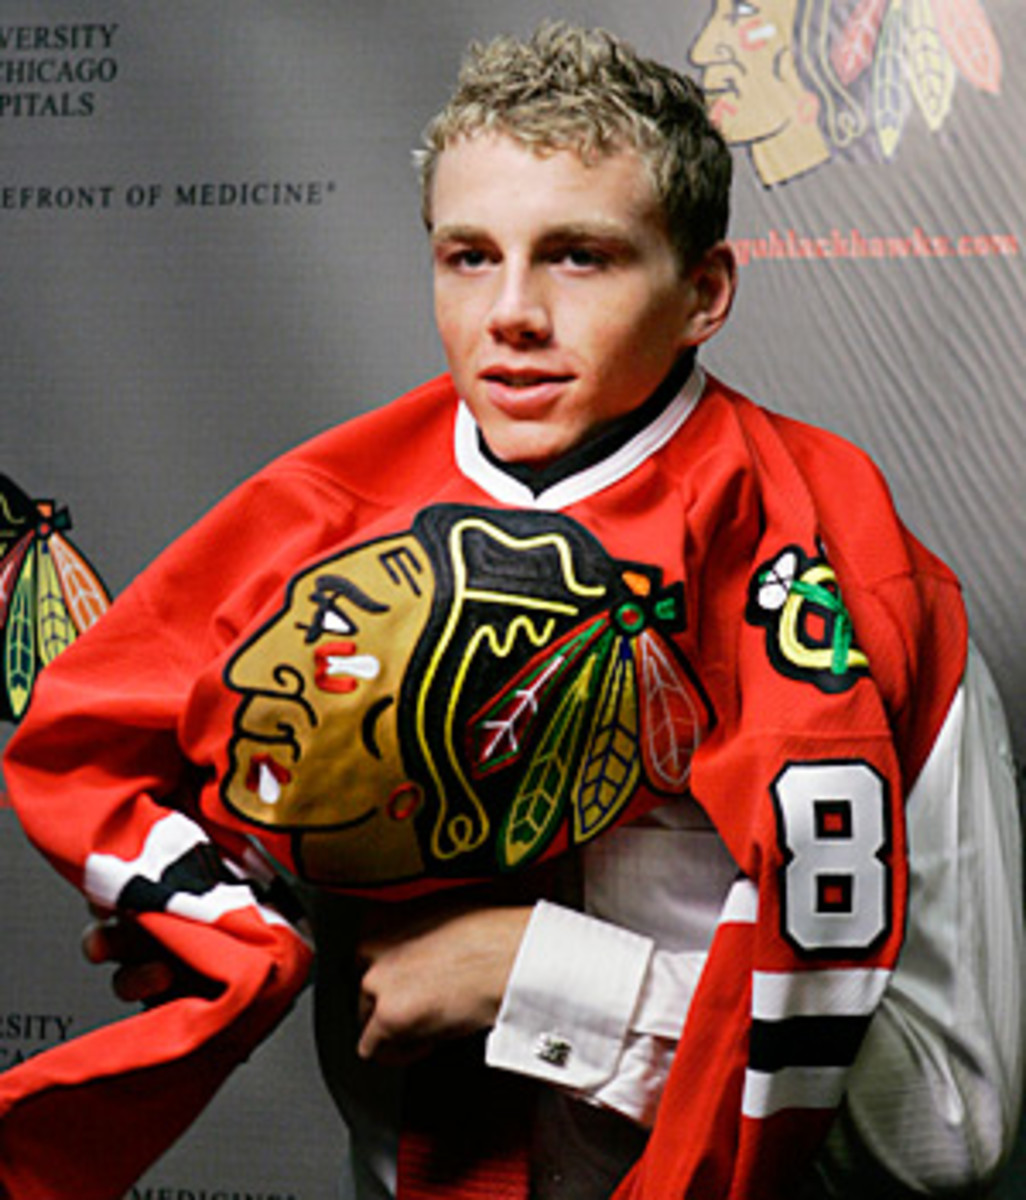 Patrick Kane was drafted first overall in 2007 ahead of notable first rounders James van Riemsdyk and Logan Couture